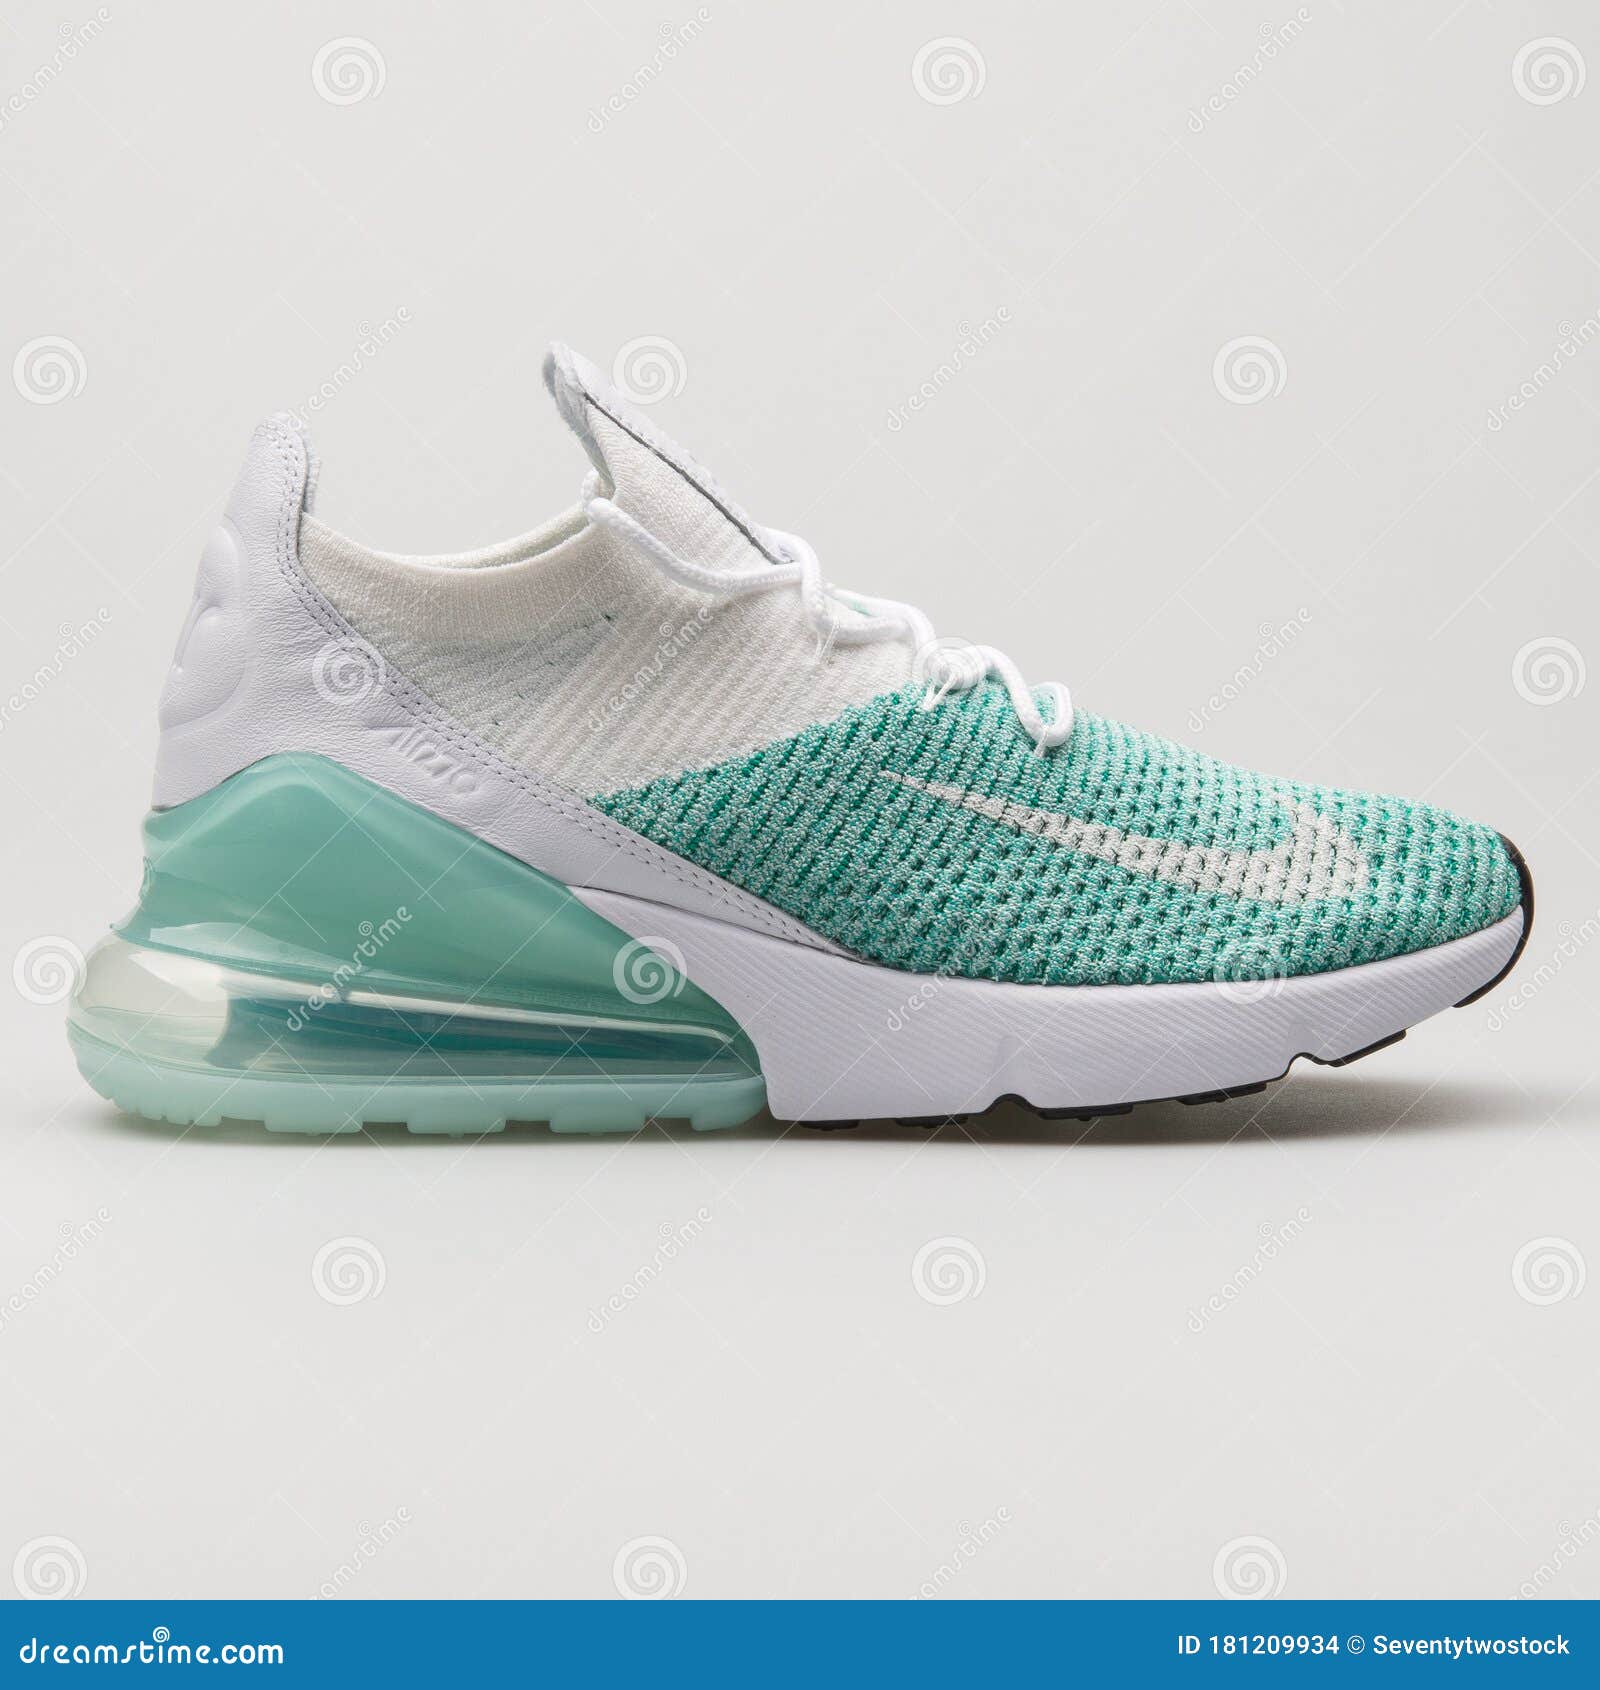 Nike Air 270 Flyknit Green and Sneaker Editorial Stock - Image of lifestyle, nike: 181209934